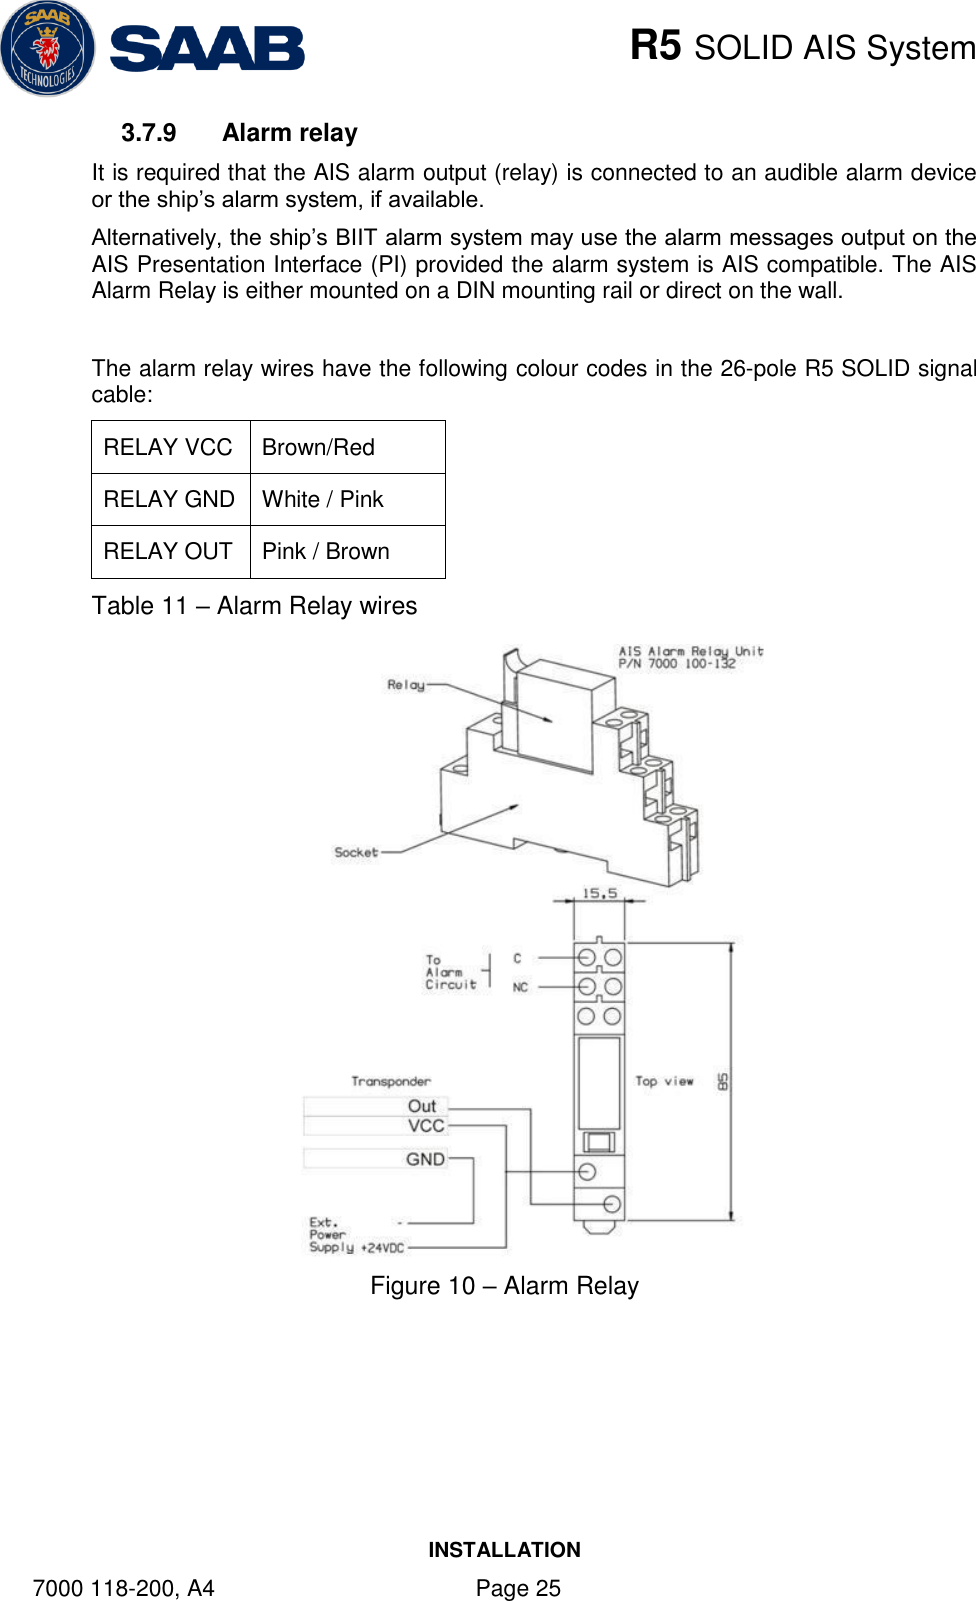    R5 SOLID AIS System INSTALLATION 7000 118-200, A4    Page 25 3.7.9  Alarm relay It is required that the AIS alarm output (relay) is connected to an audible alarm device or the ship‟s alarm system, if available. Alternatively, the ship‟s BIIT alarm system may use the alarm messages output on the AIS Presentation Interface (PI) provided the alarm system is AIS compatible. The AIS Alarm Relay is either mounted on a DIN mounting rail or direct on the wall.  The alarm relay wires have the following colour codes in the 26-pole R5 SOLID signal cable: RELAY VCC Brown/Red RELAY GND White / Pink RELAY OUT Pink / Brown Table 11 – Alarm Relay wires  Figure 10 – Alarm Relay    